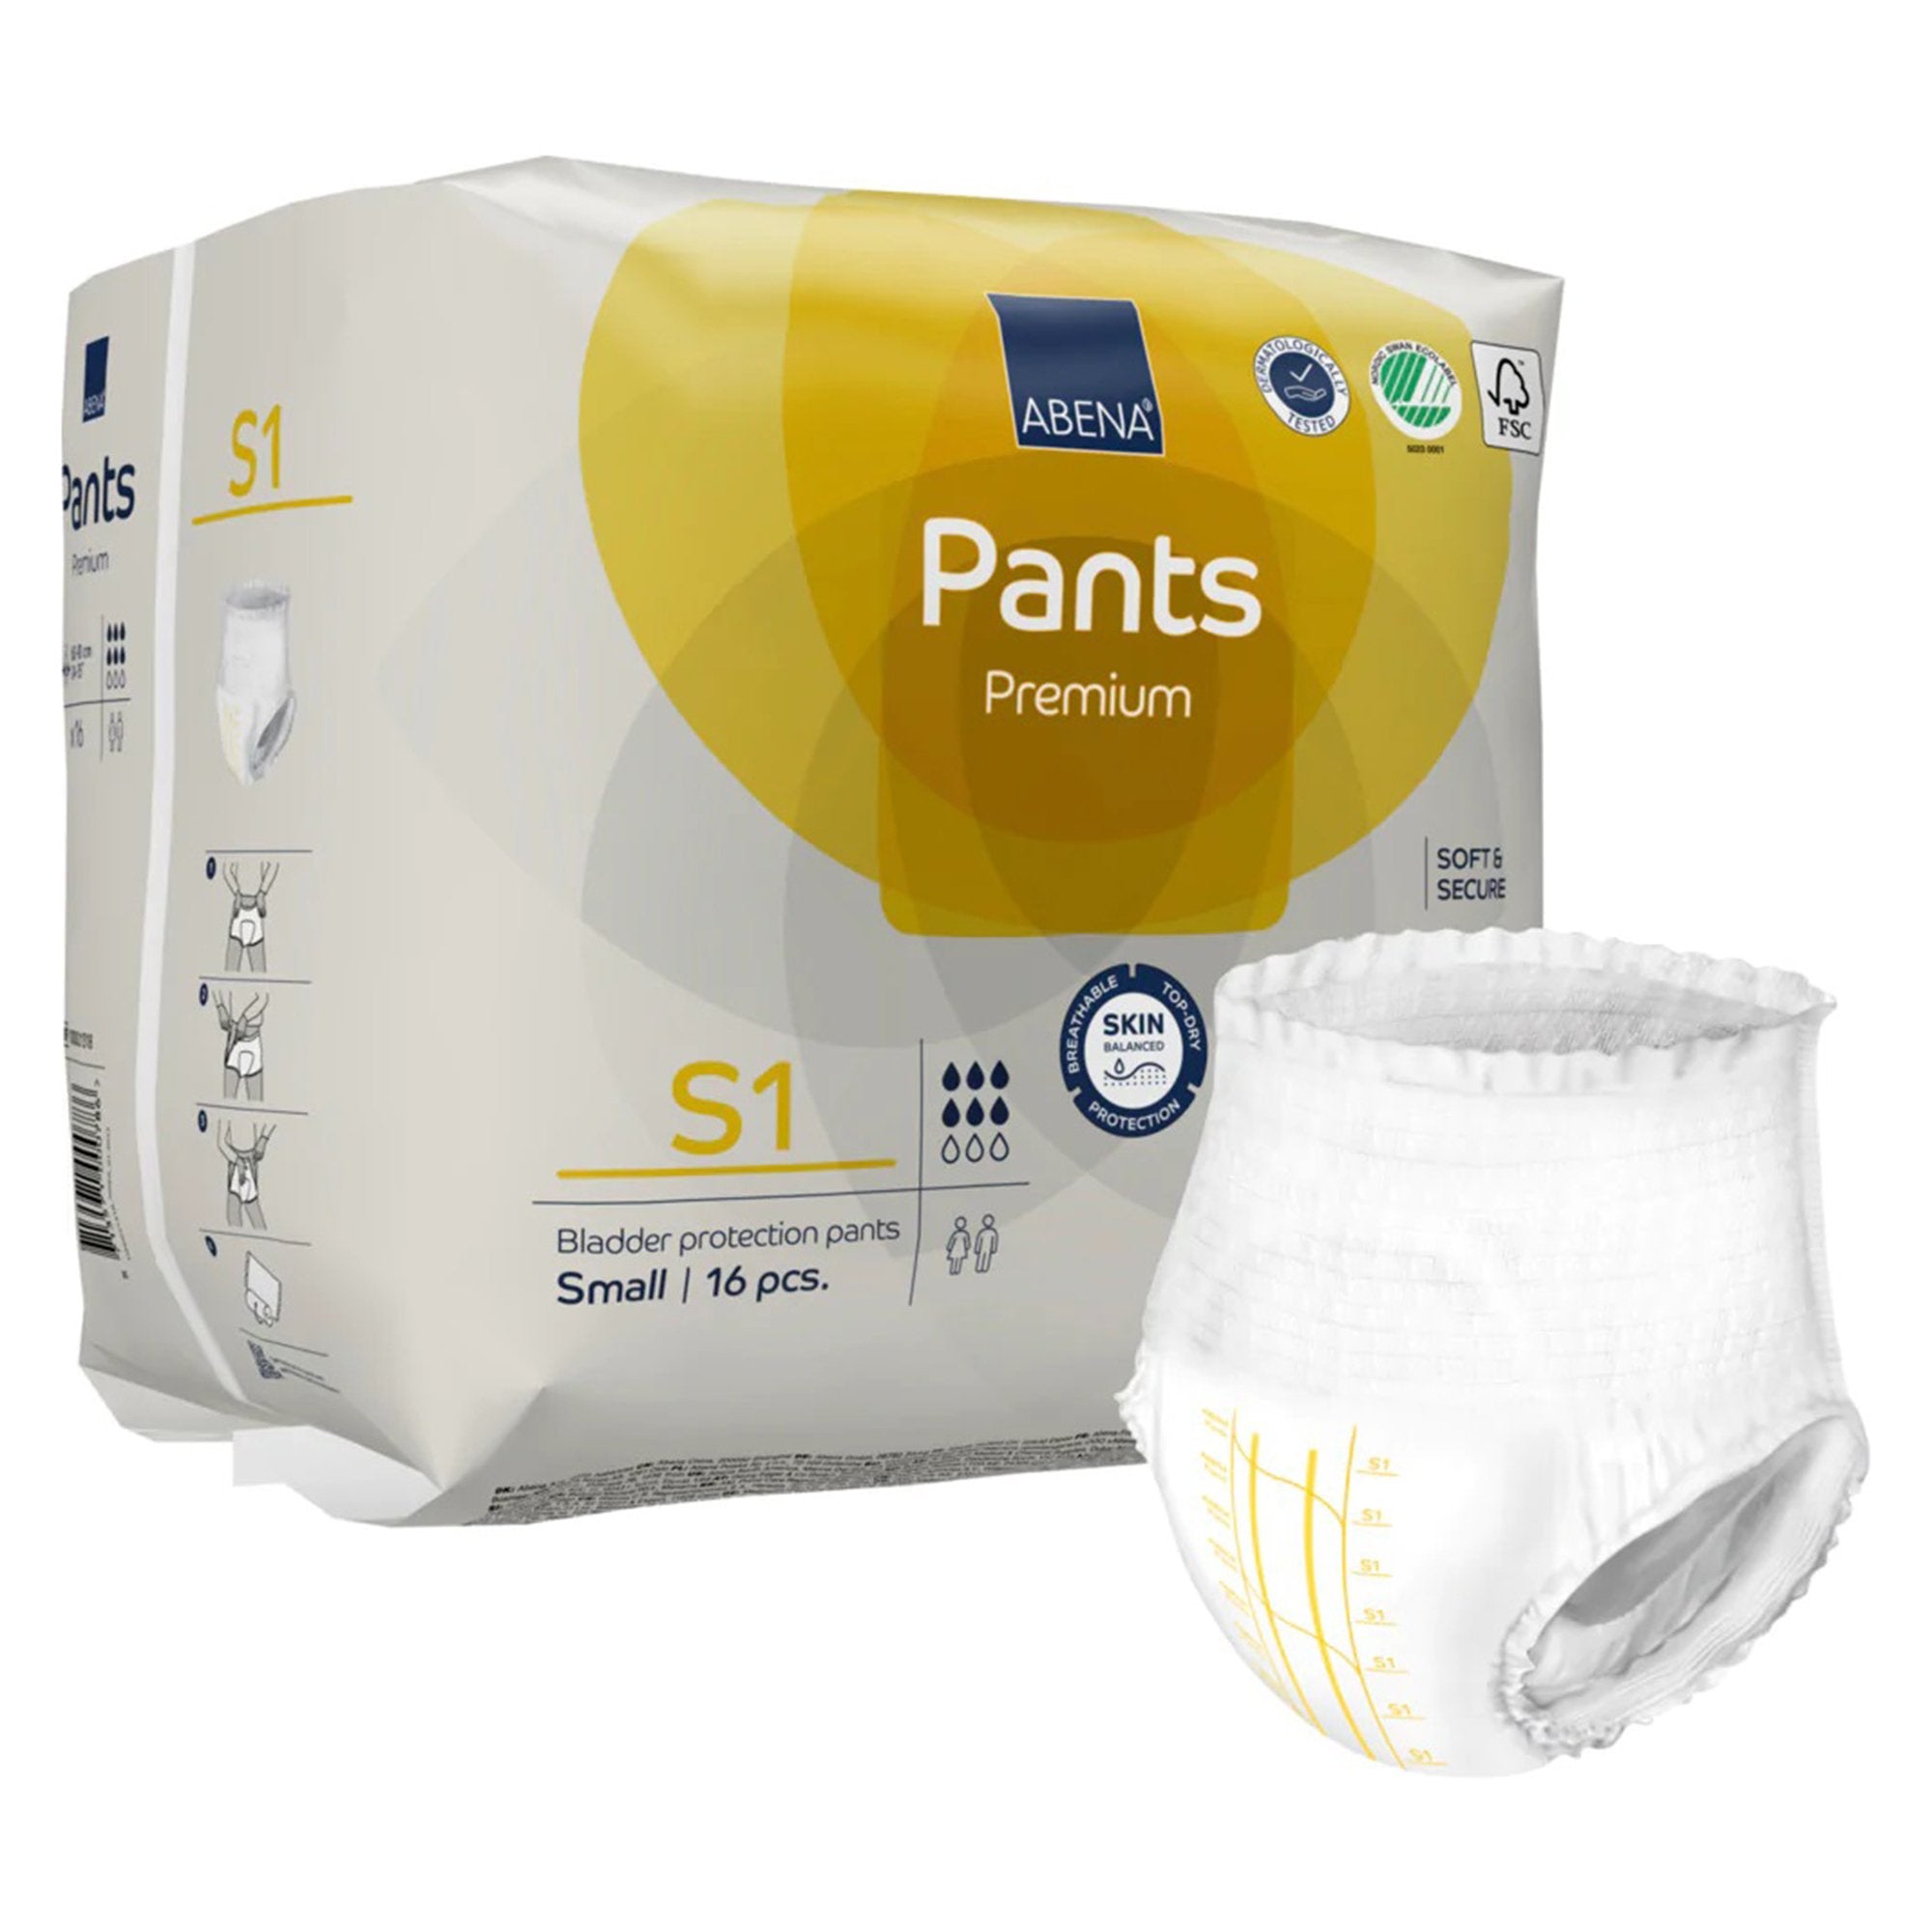 Unisex Adult Absorbent Underwear Abena Premium Pants S2 Pull On with Tear Away Seams Small Disposable Moderate Absorbency